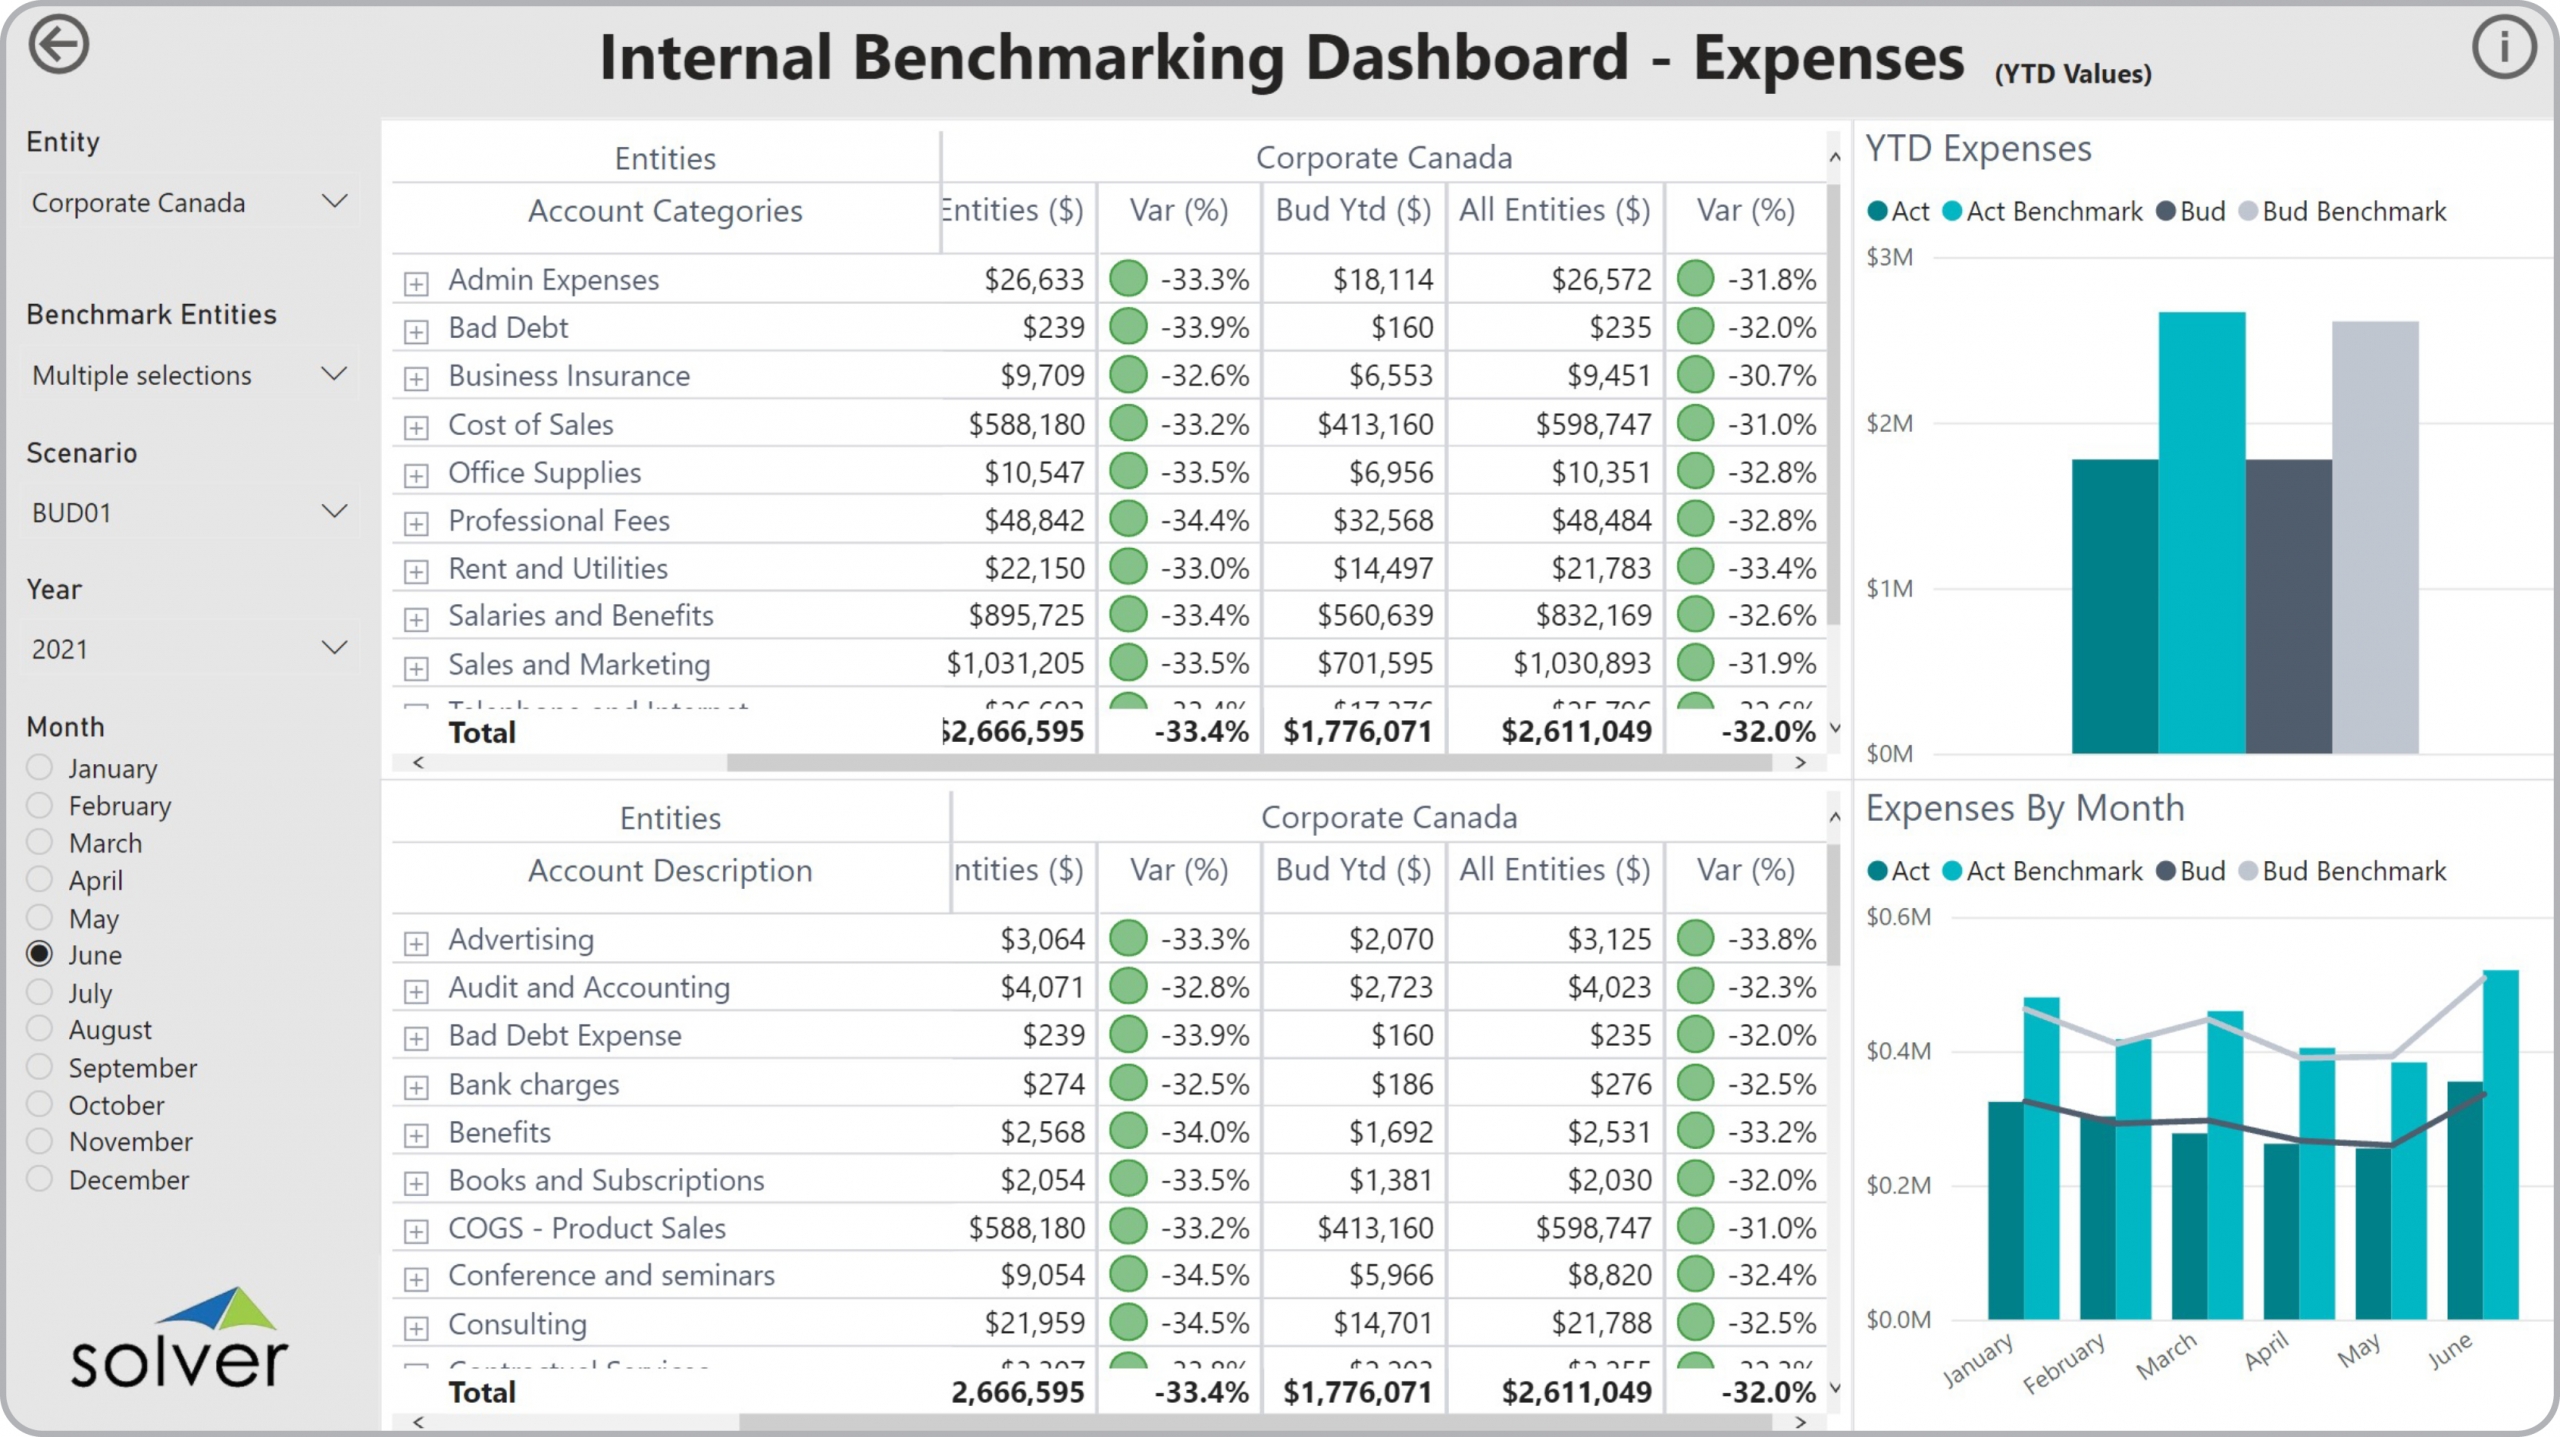 Example of an Expense Benchmarking Dashboard to Streamline the Monthly Reporting Process